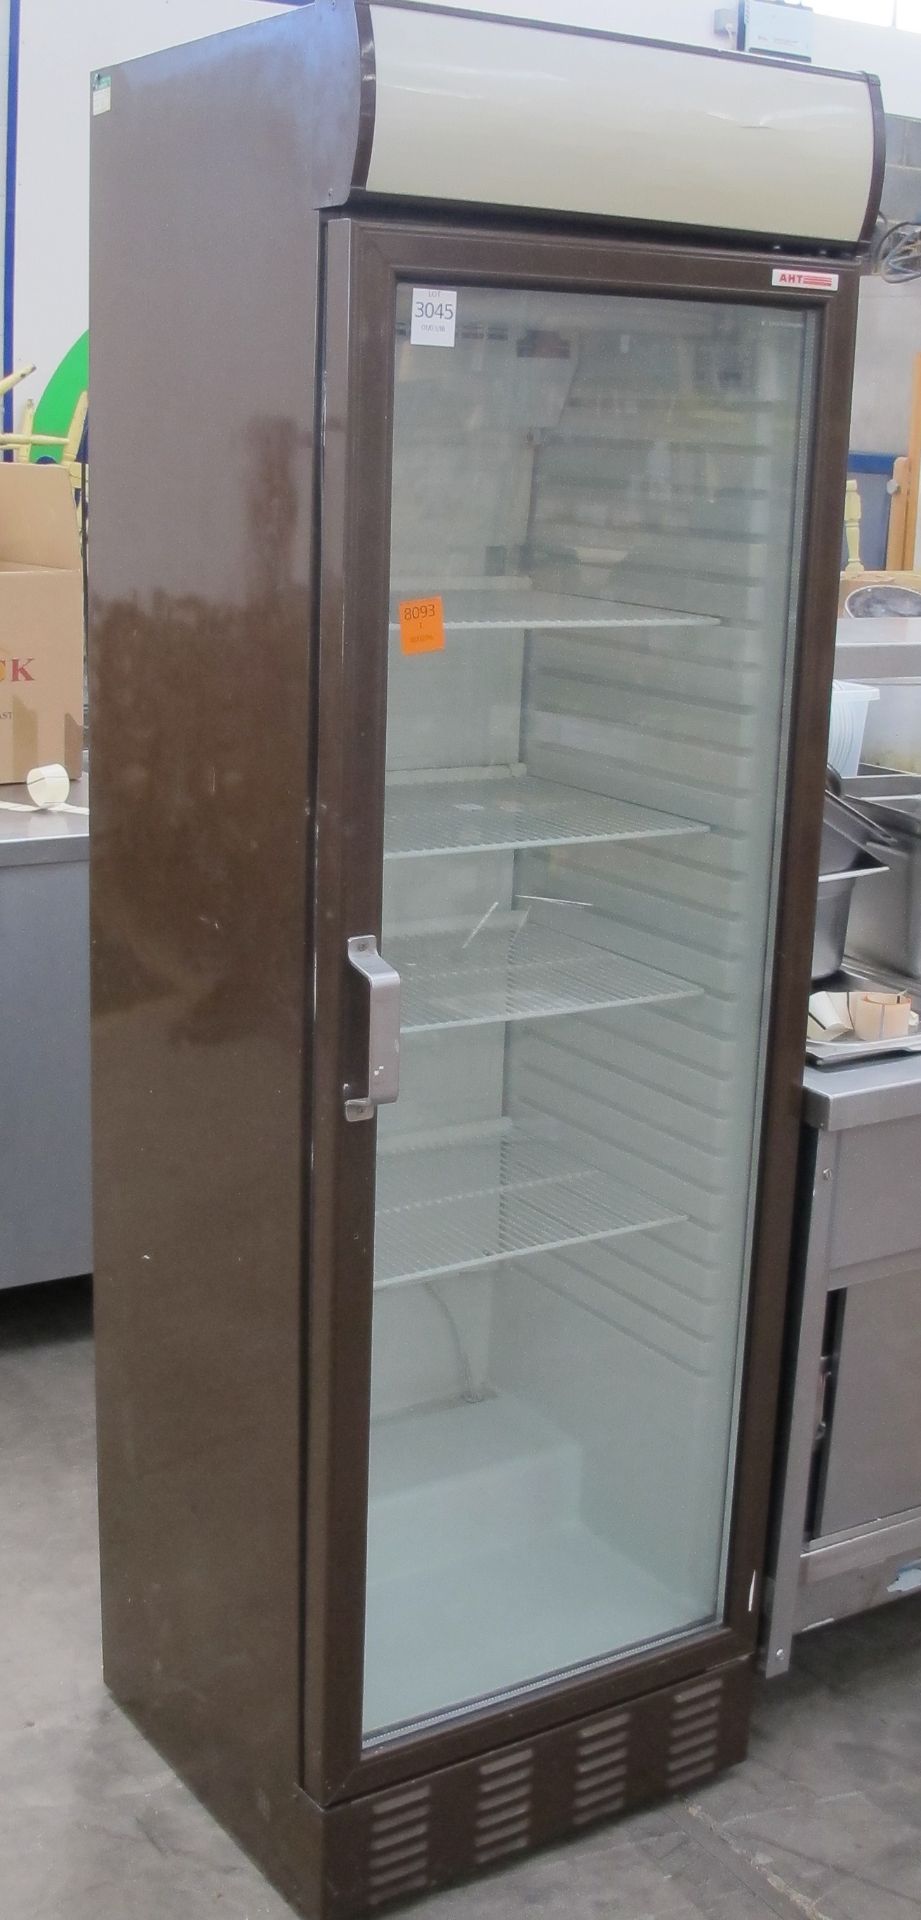 * An AHT tall 240V display glass fronted fridge. Please note there is a £5 + VAT Lift Out Fee on